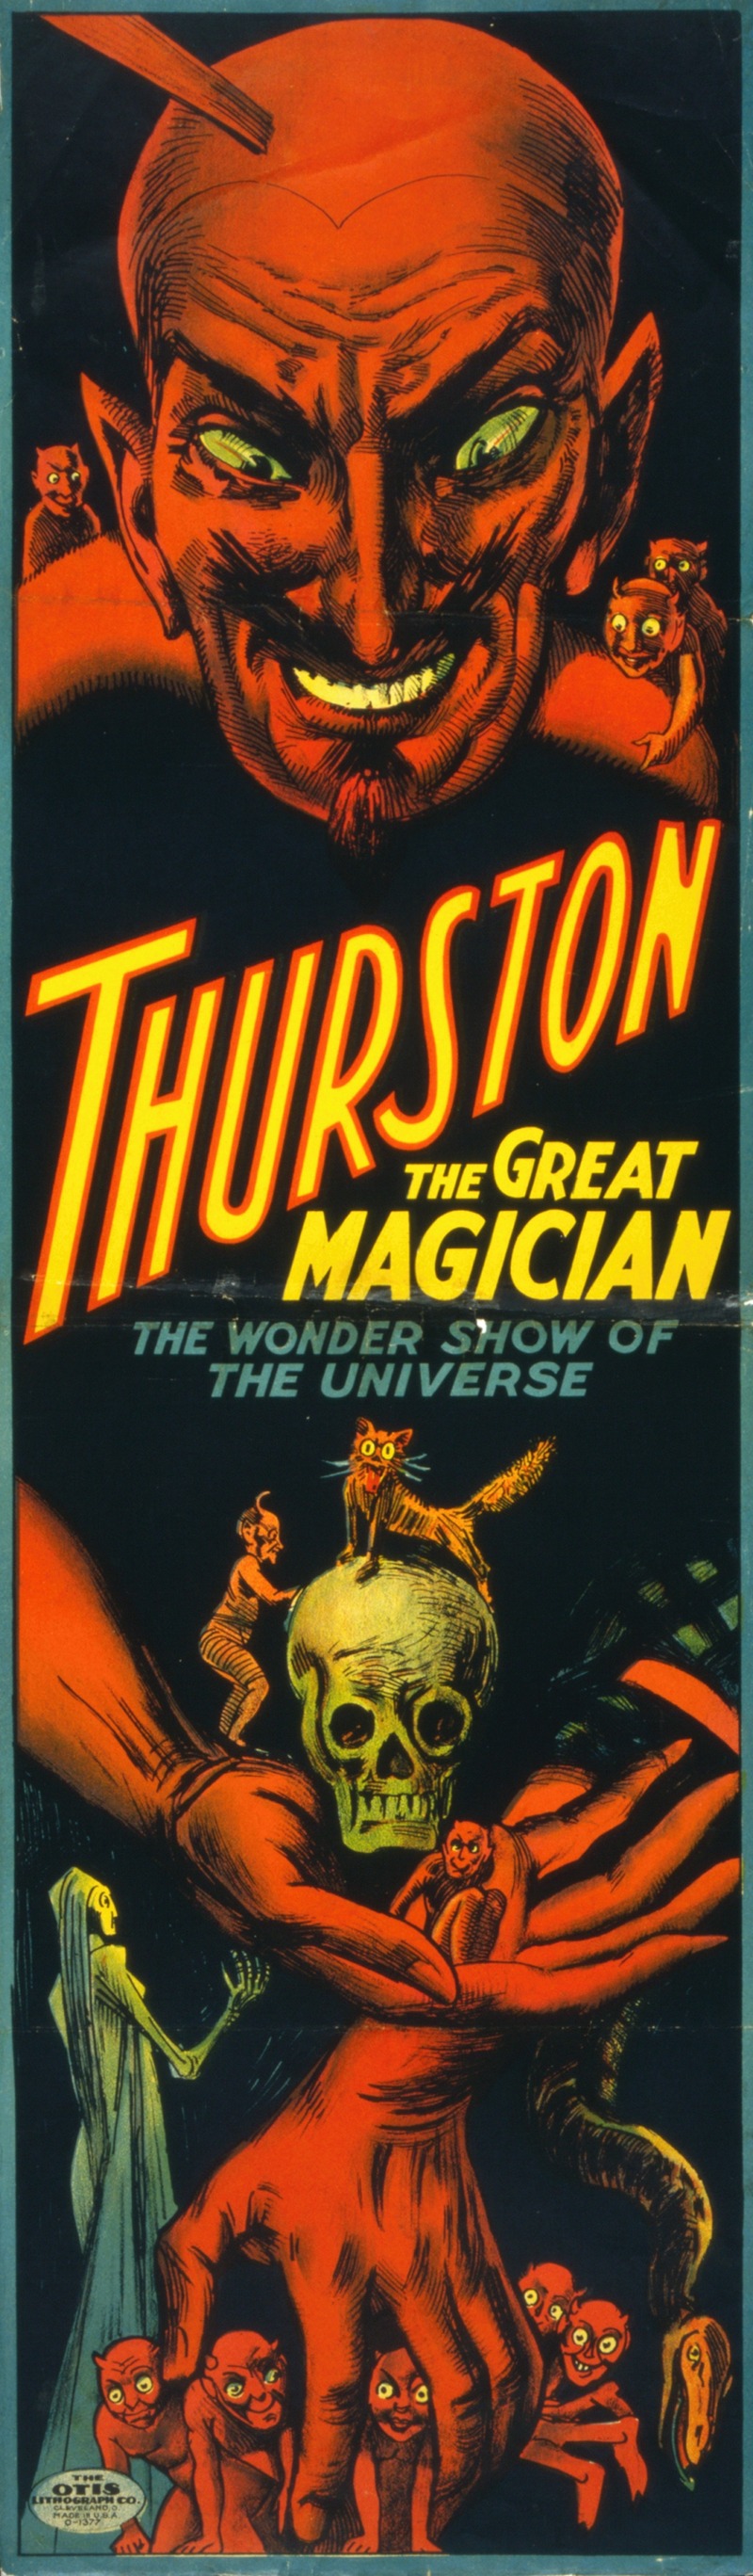 Otis Lithograph Co - Thurston the great magician the wonder show of the universe.